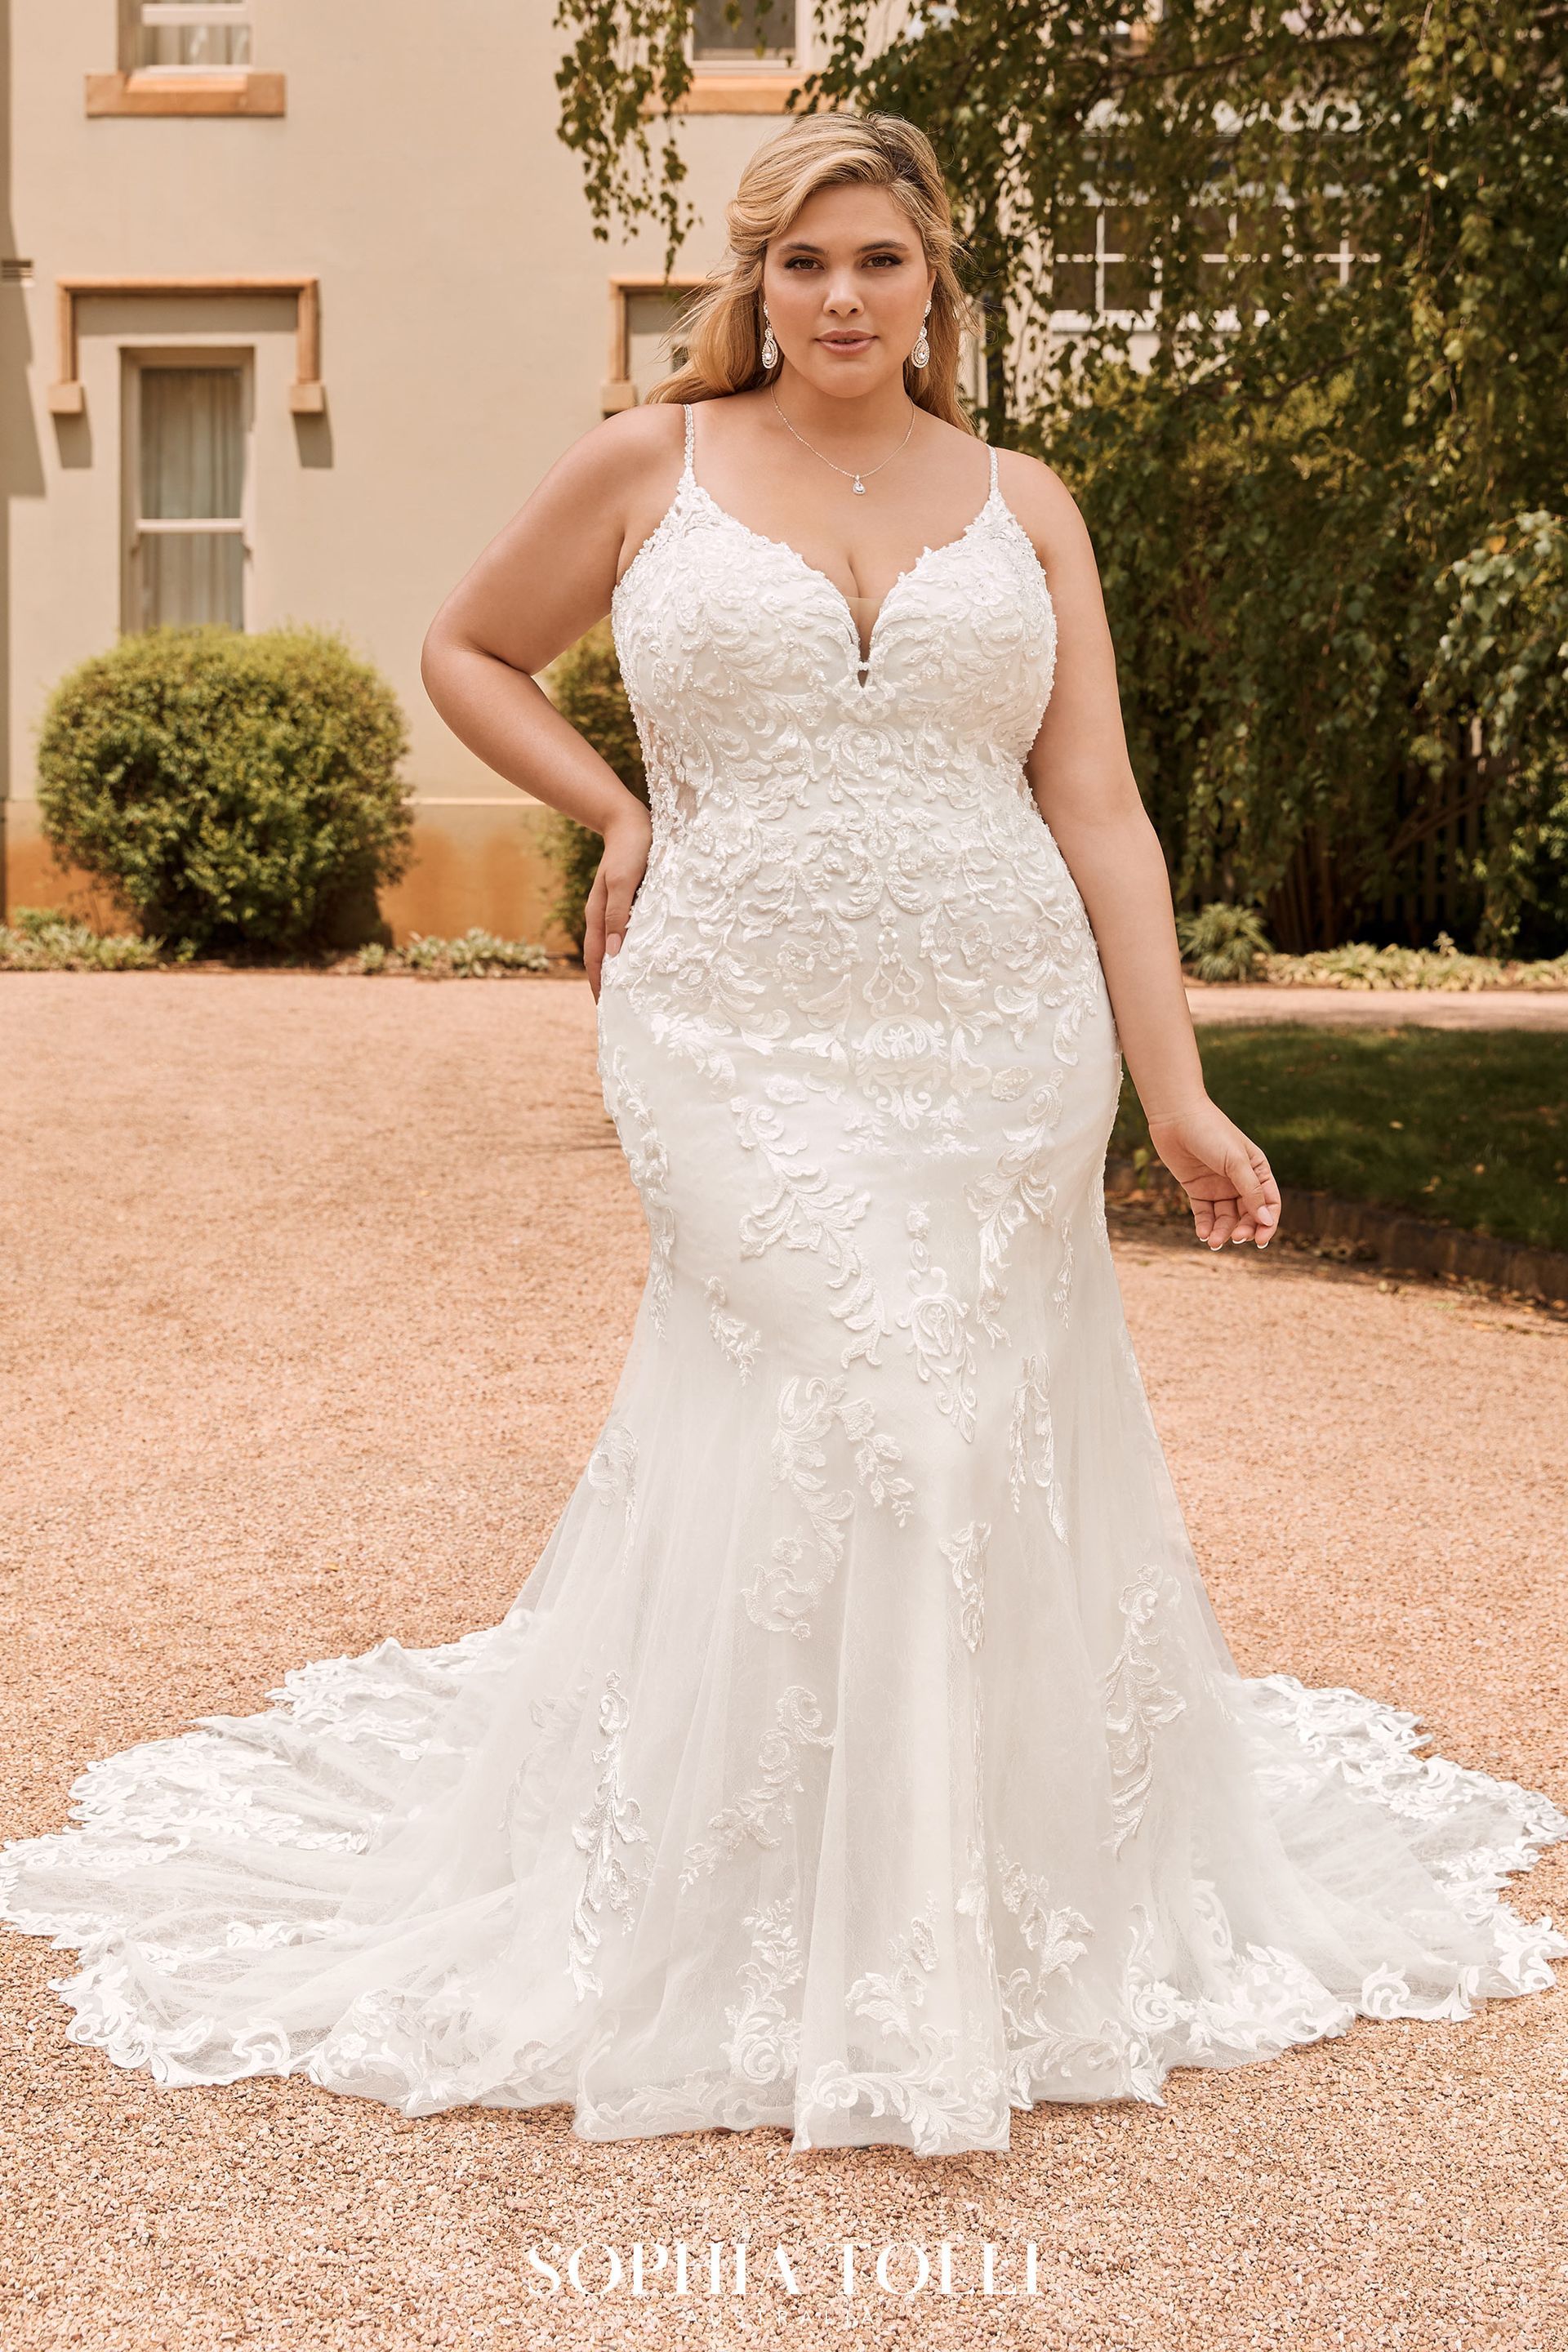 A plus size bride in a white wedding dress is standing in front of a building.